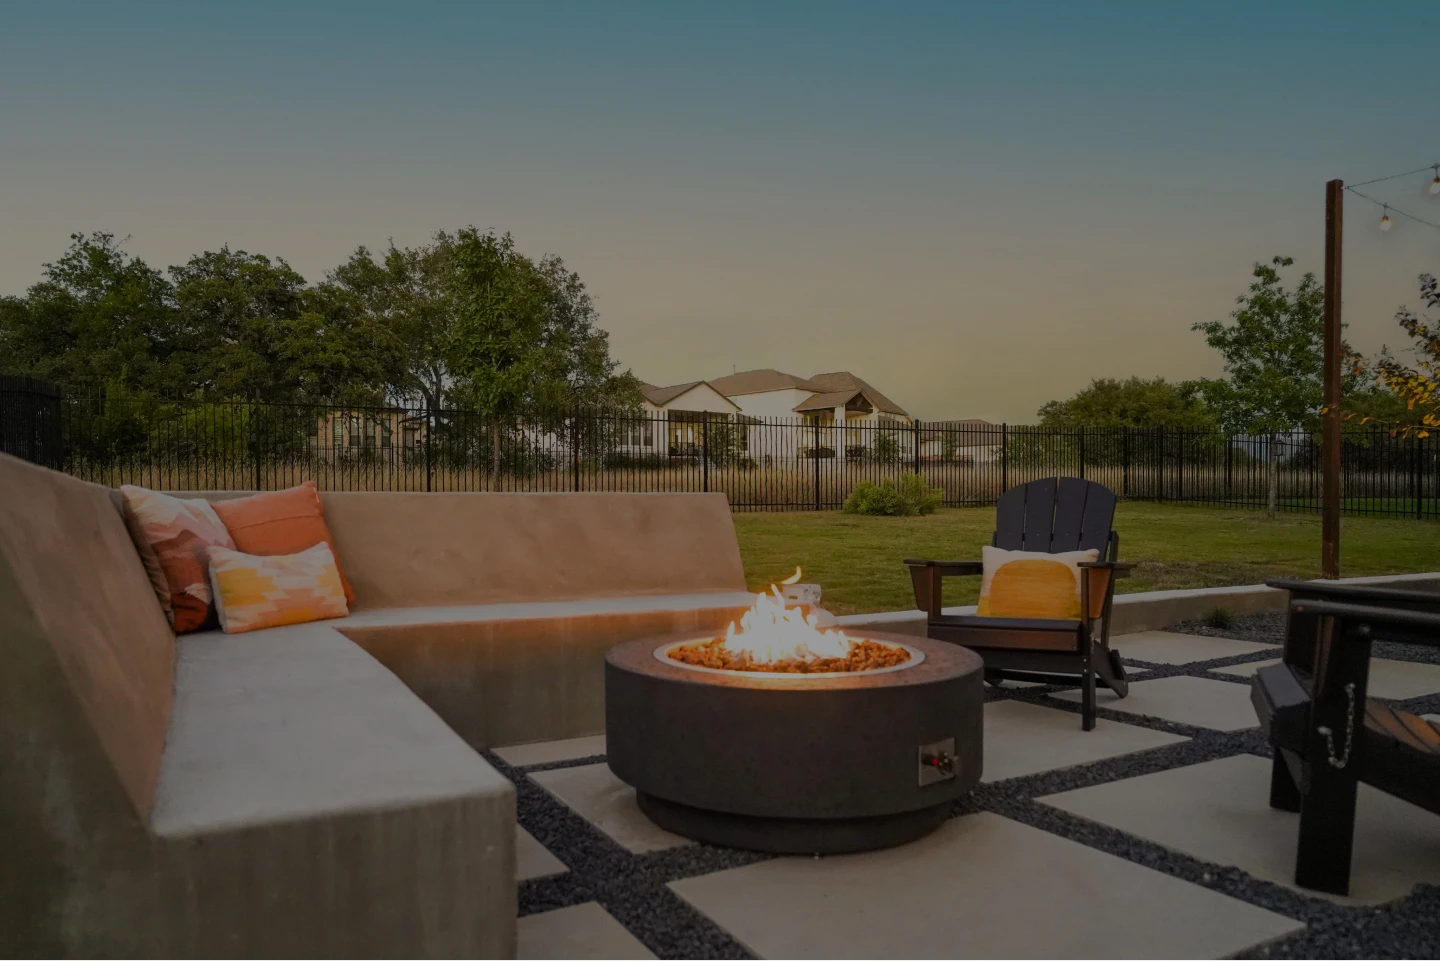 Outdoor chairs surrounding a rectangular fire pit with string lights hanging above.